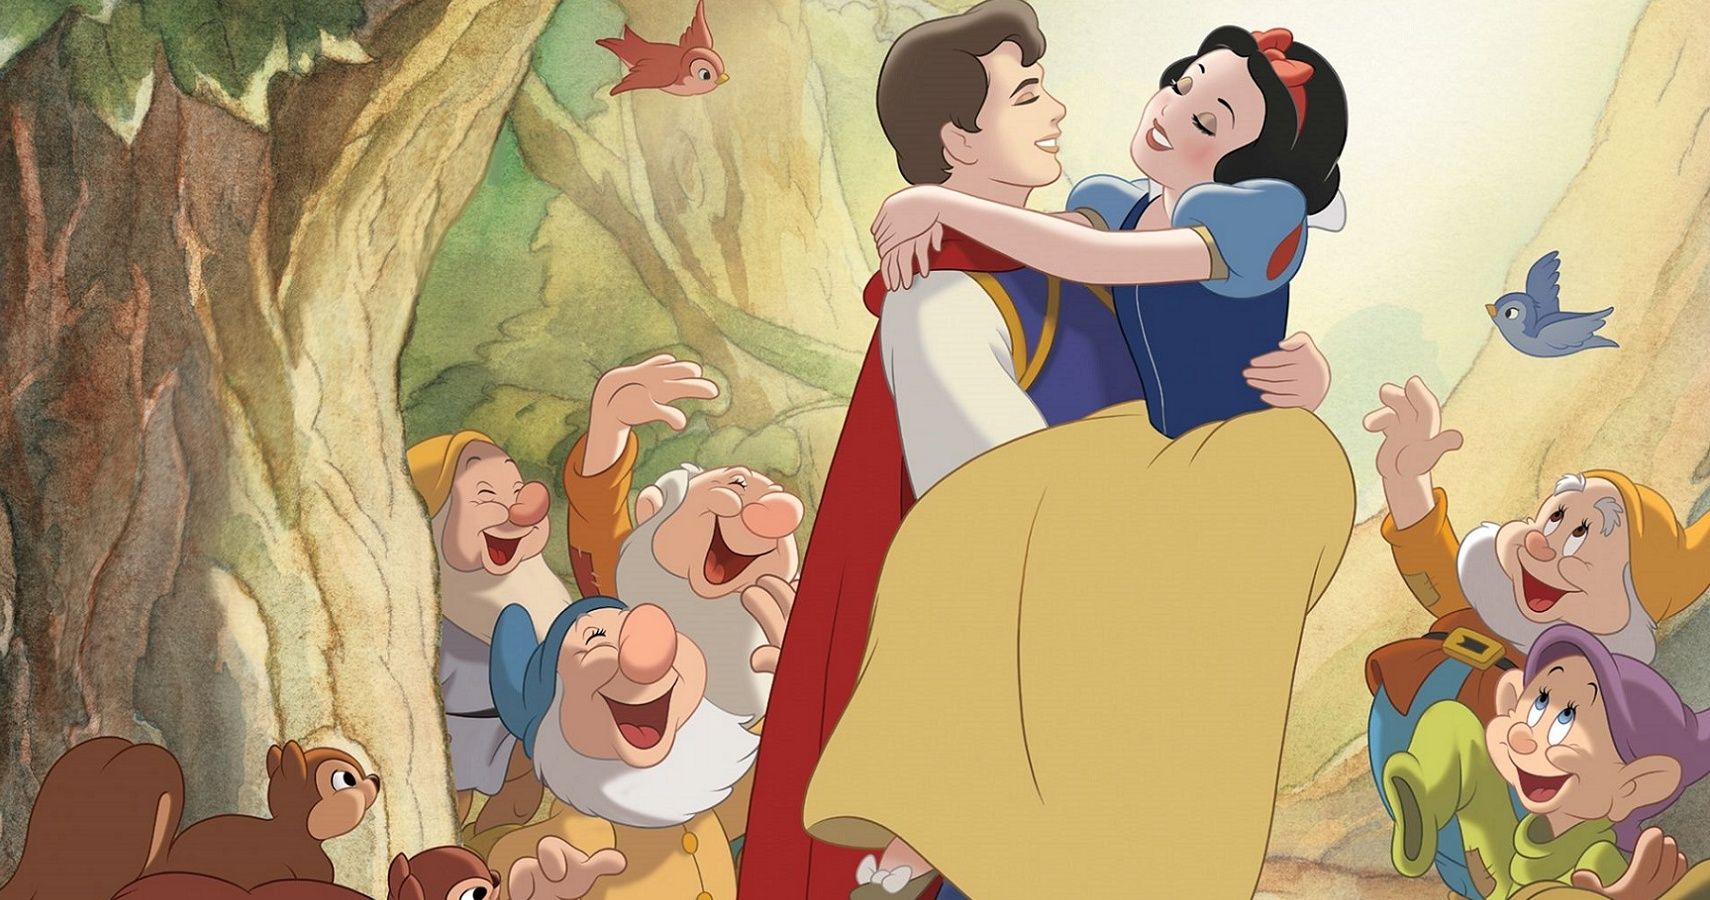 Snow White Ranking The Main Characters Based On Their Intelligence